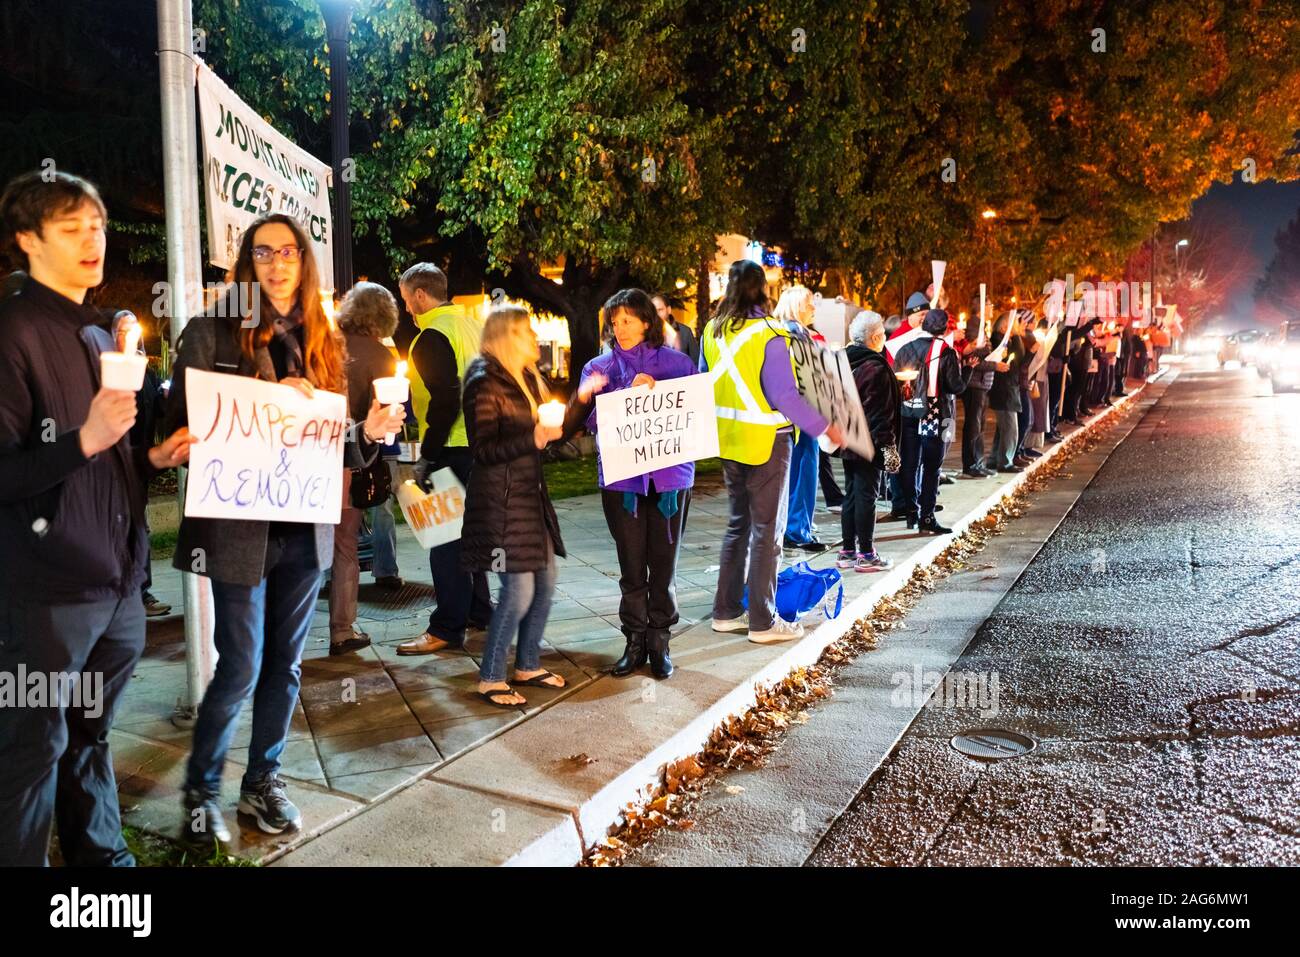 Dec 17, 2019 Mountain View / CA / USA - Protesters carrying signs at the Impeachment Eve Vigil rally held in one of the cities of San Francisco Bay; Stock Photo